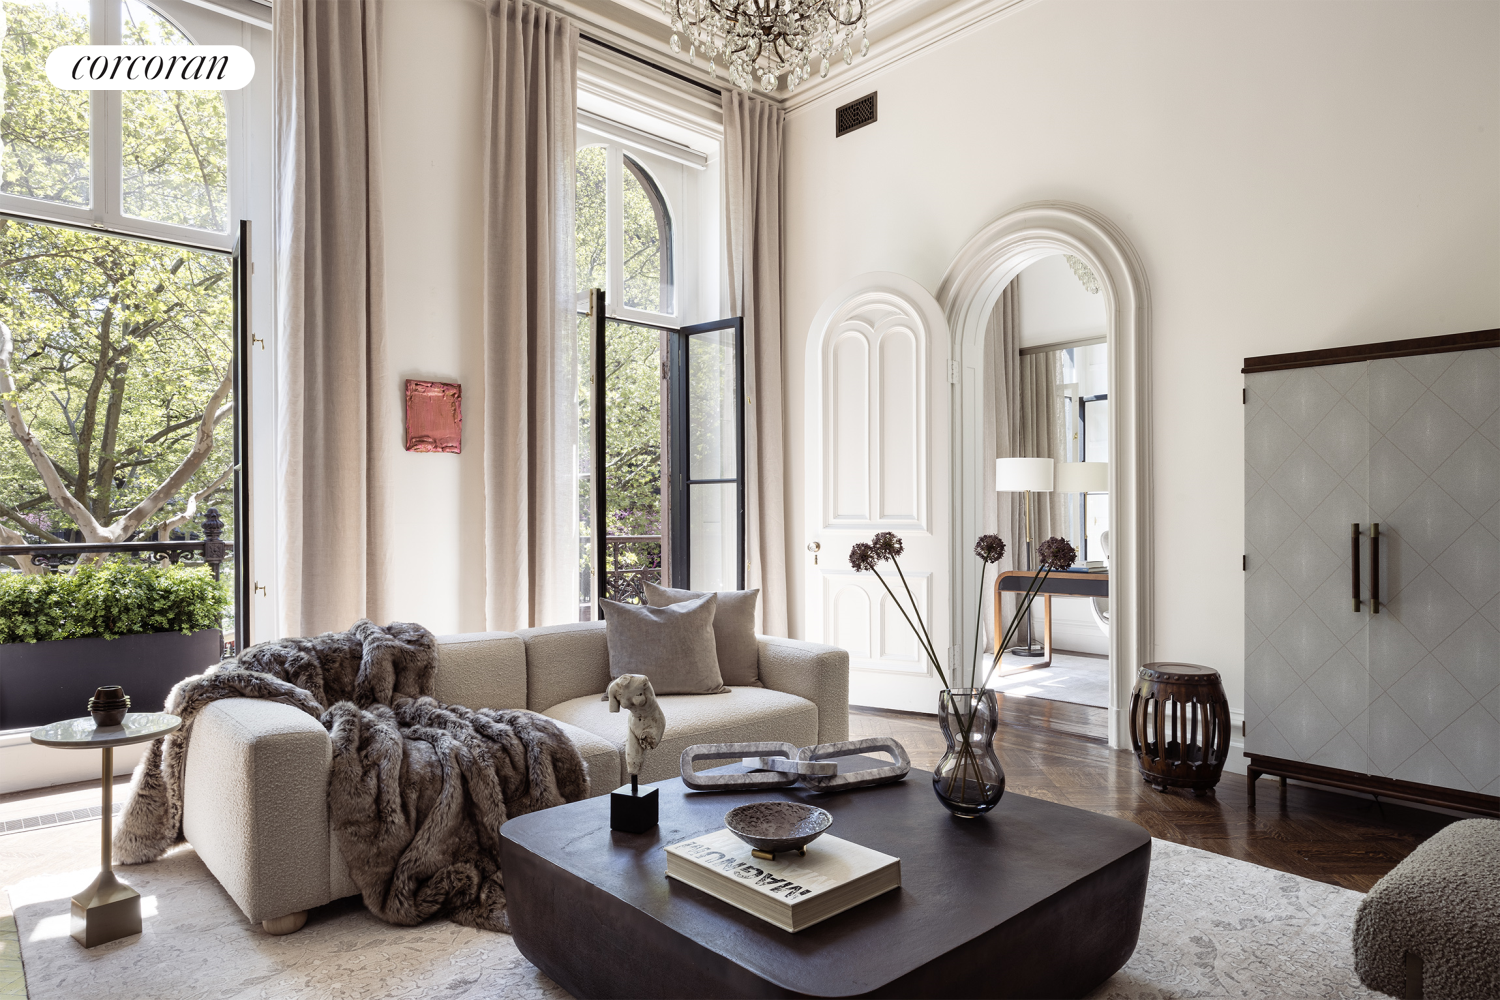 243 East 17th Street, Gramercy Park, Downtown, NYC - 6 Bedrooms  
5.5 Bathrooms  
15 Rooms - 